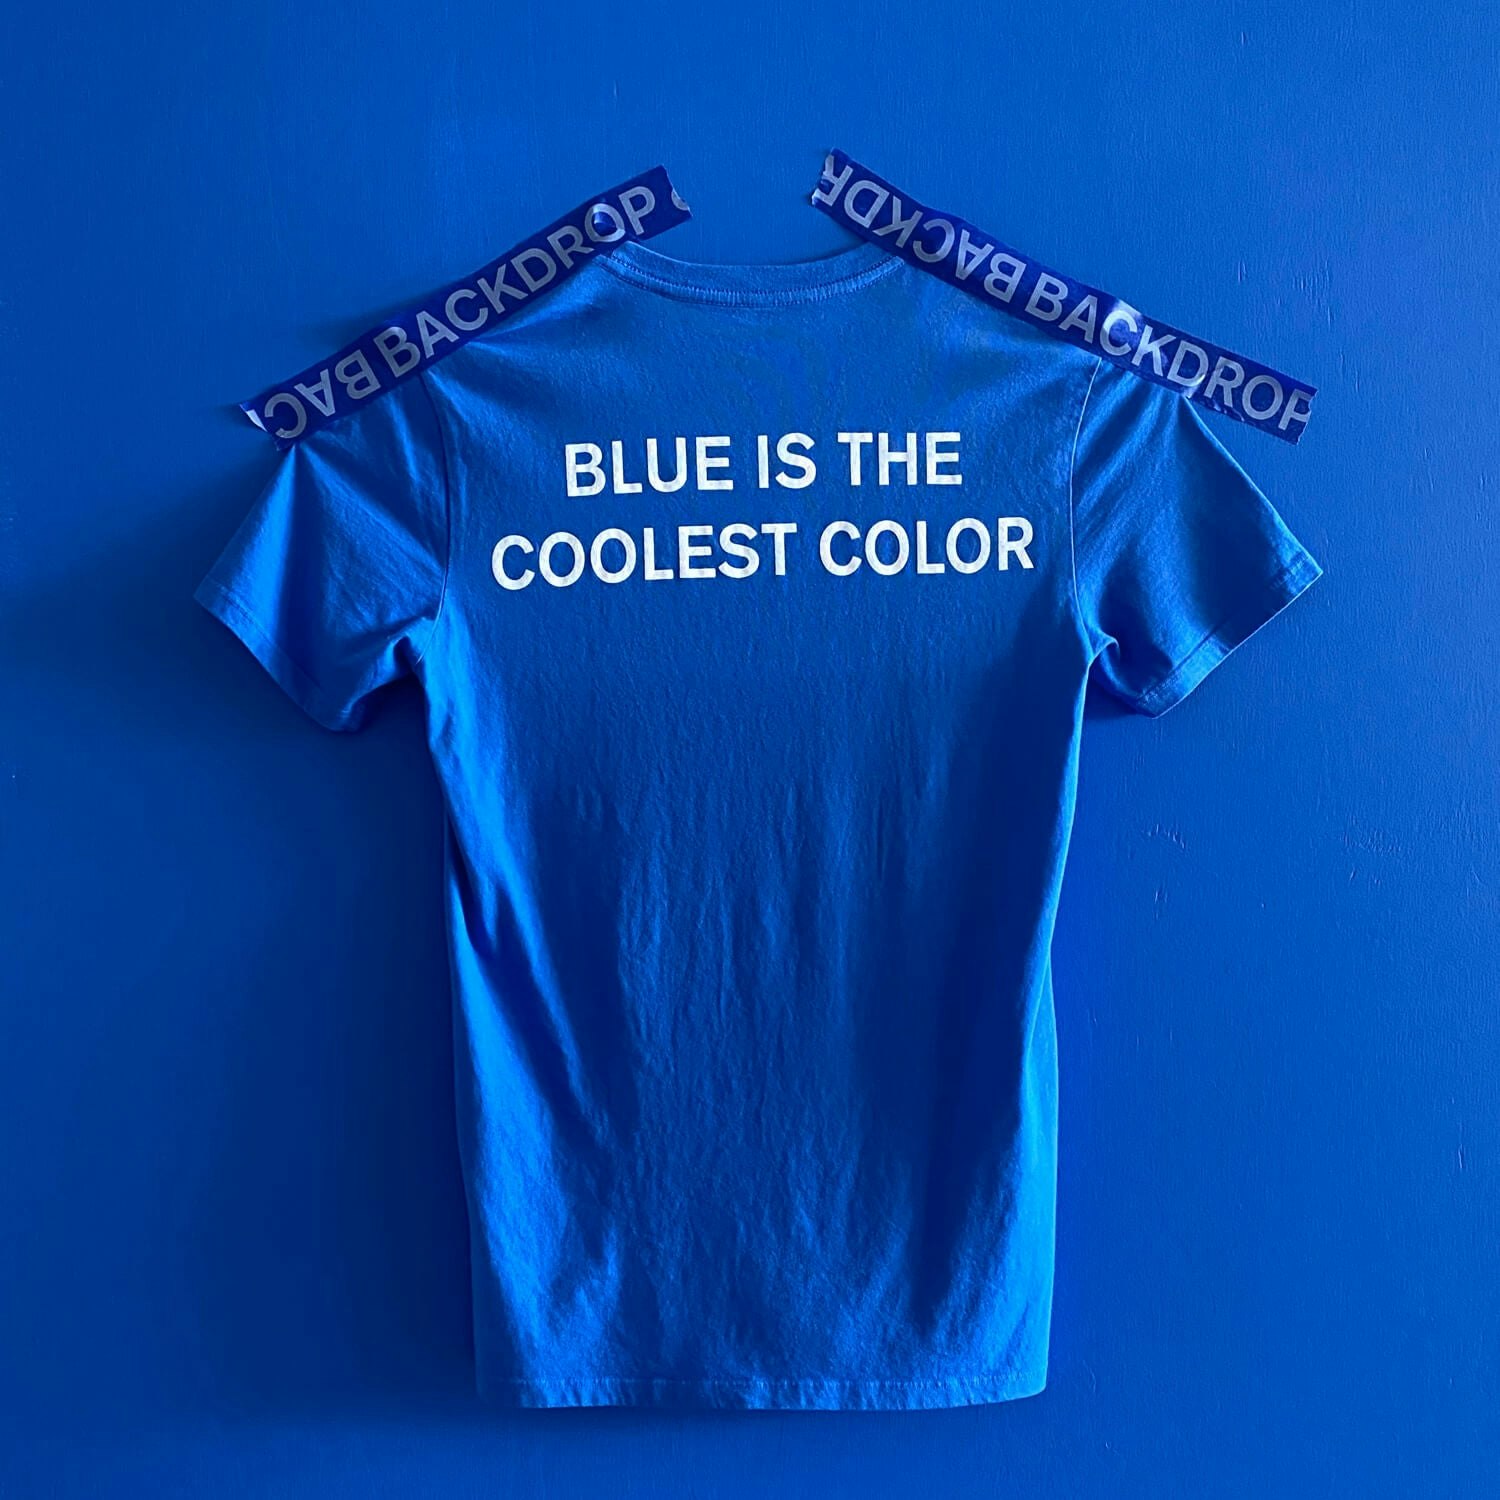 BLUE IS THE COOLEST COLOR painted on a wall with a t-shirt taped to it